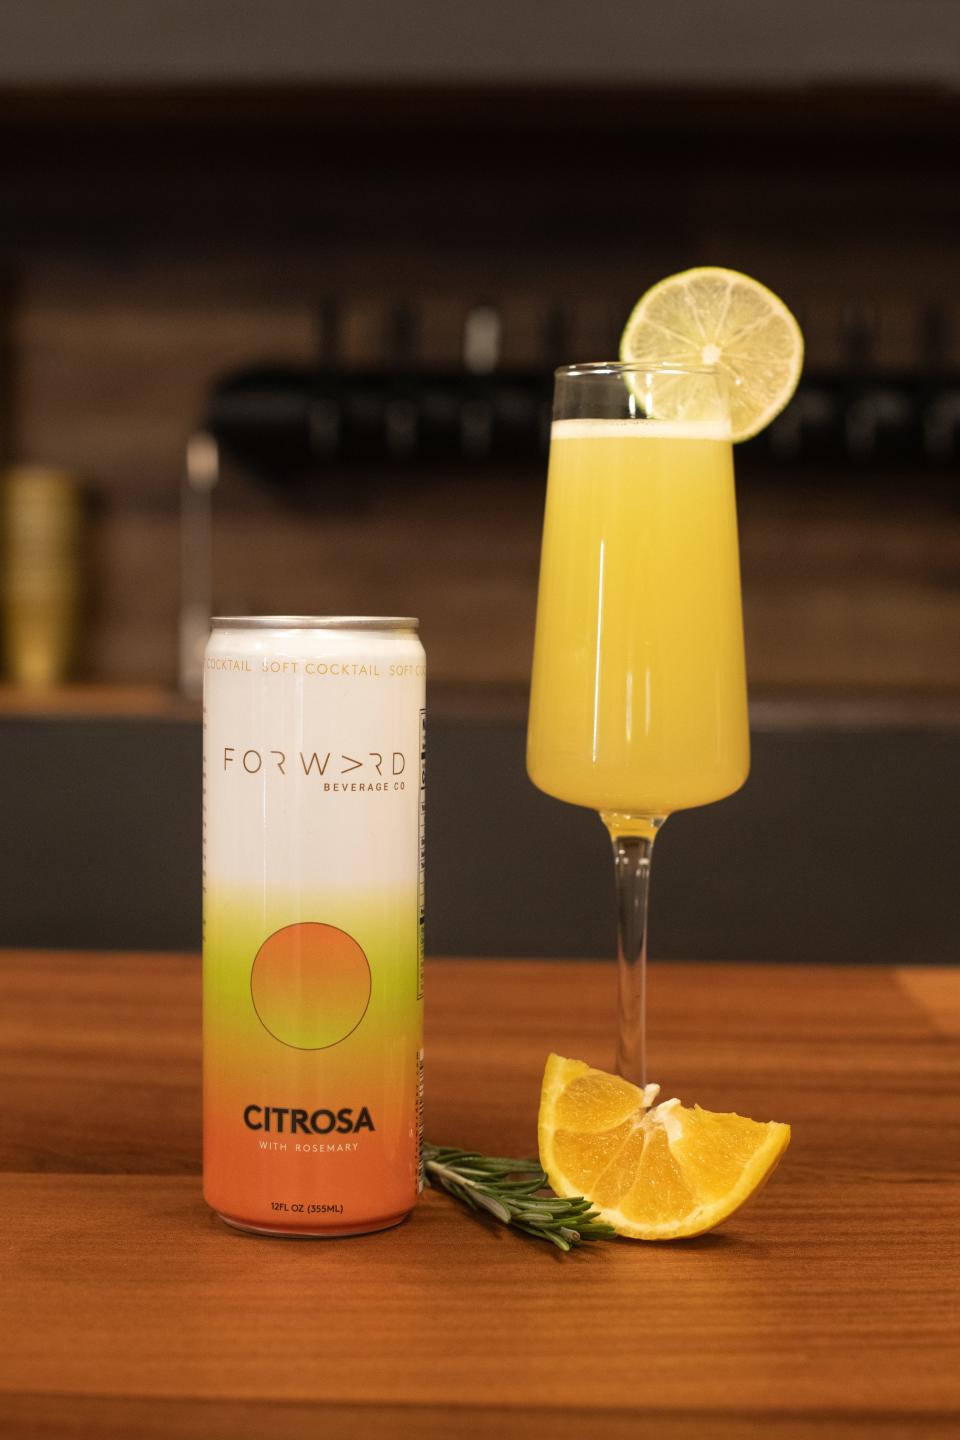 The nonalcoholic Citrosa soft cocktail from Wausau's Forward Beverage Co. was inspired by a mimosa.